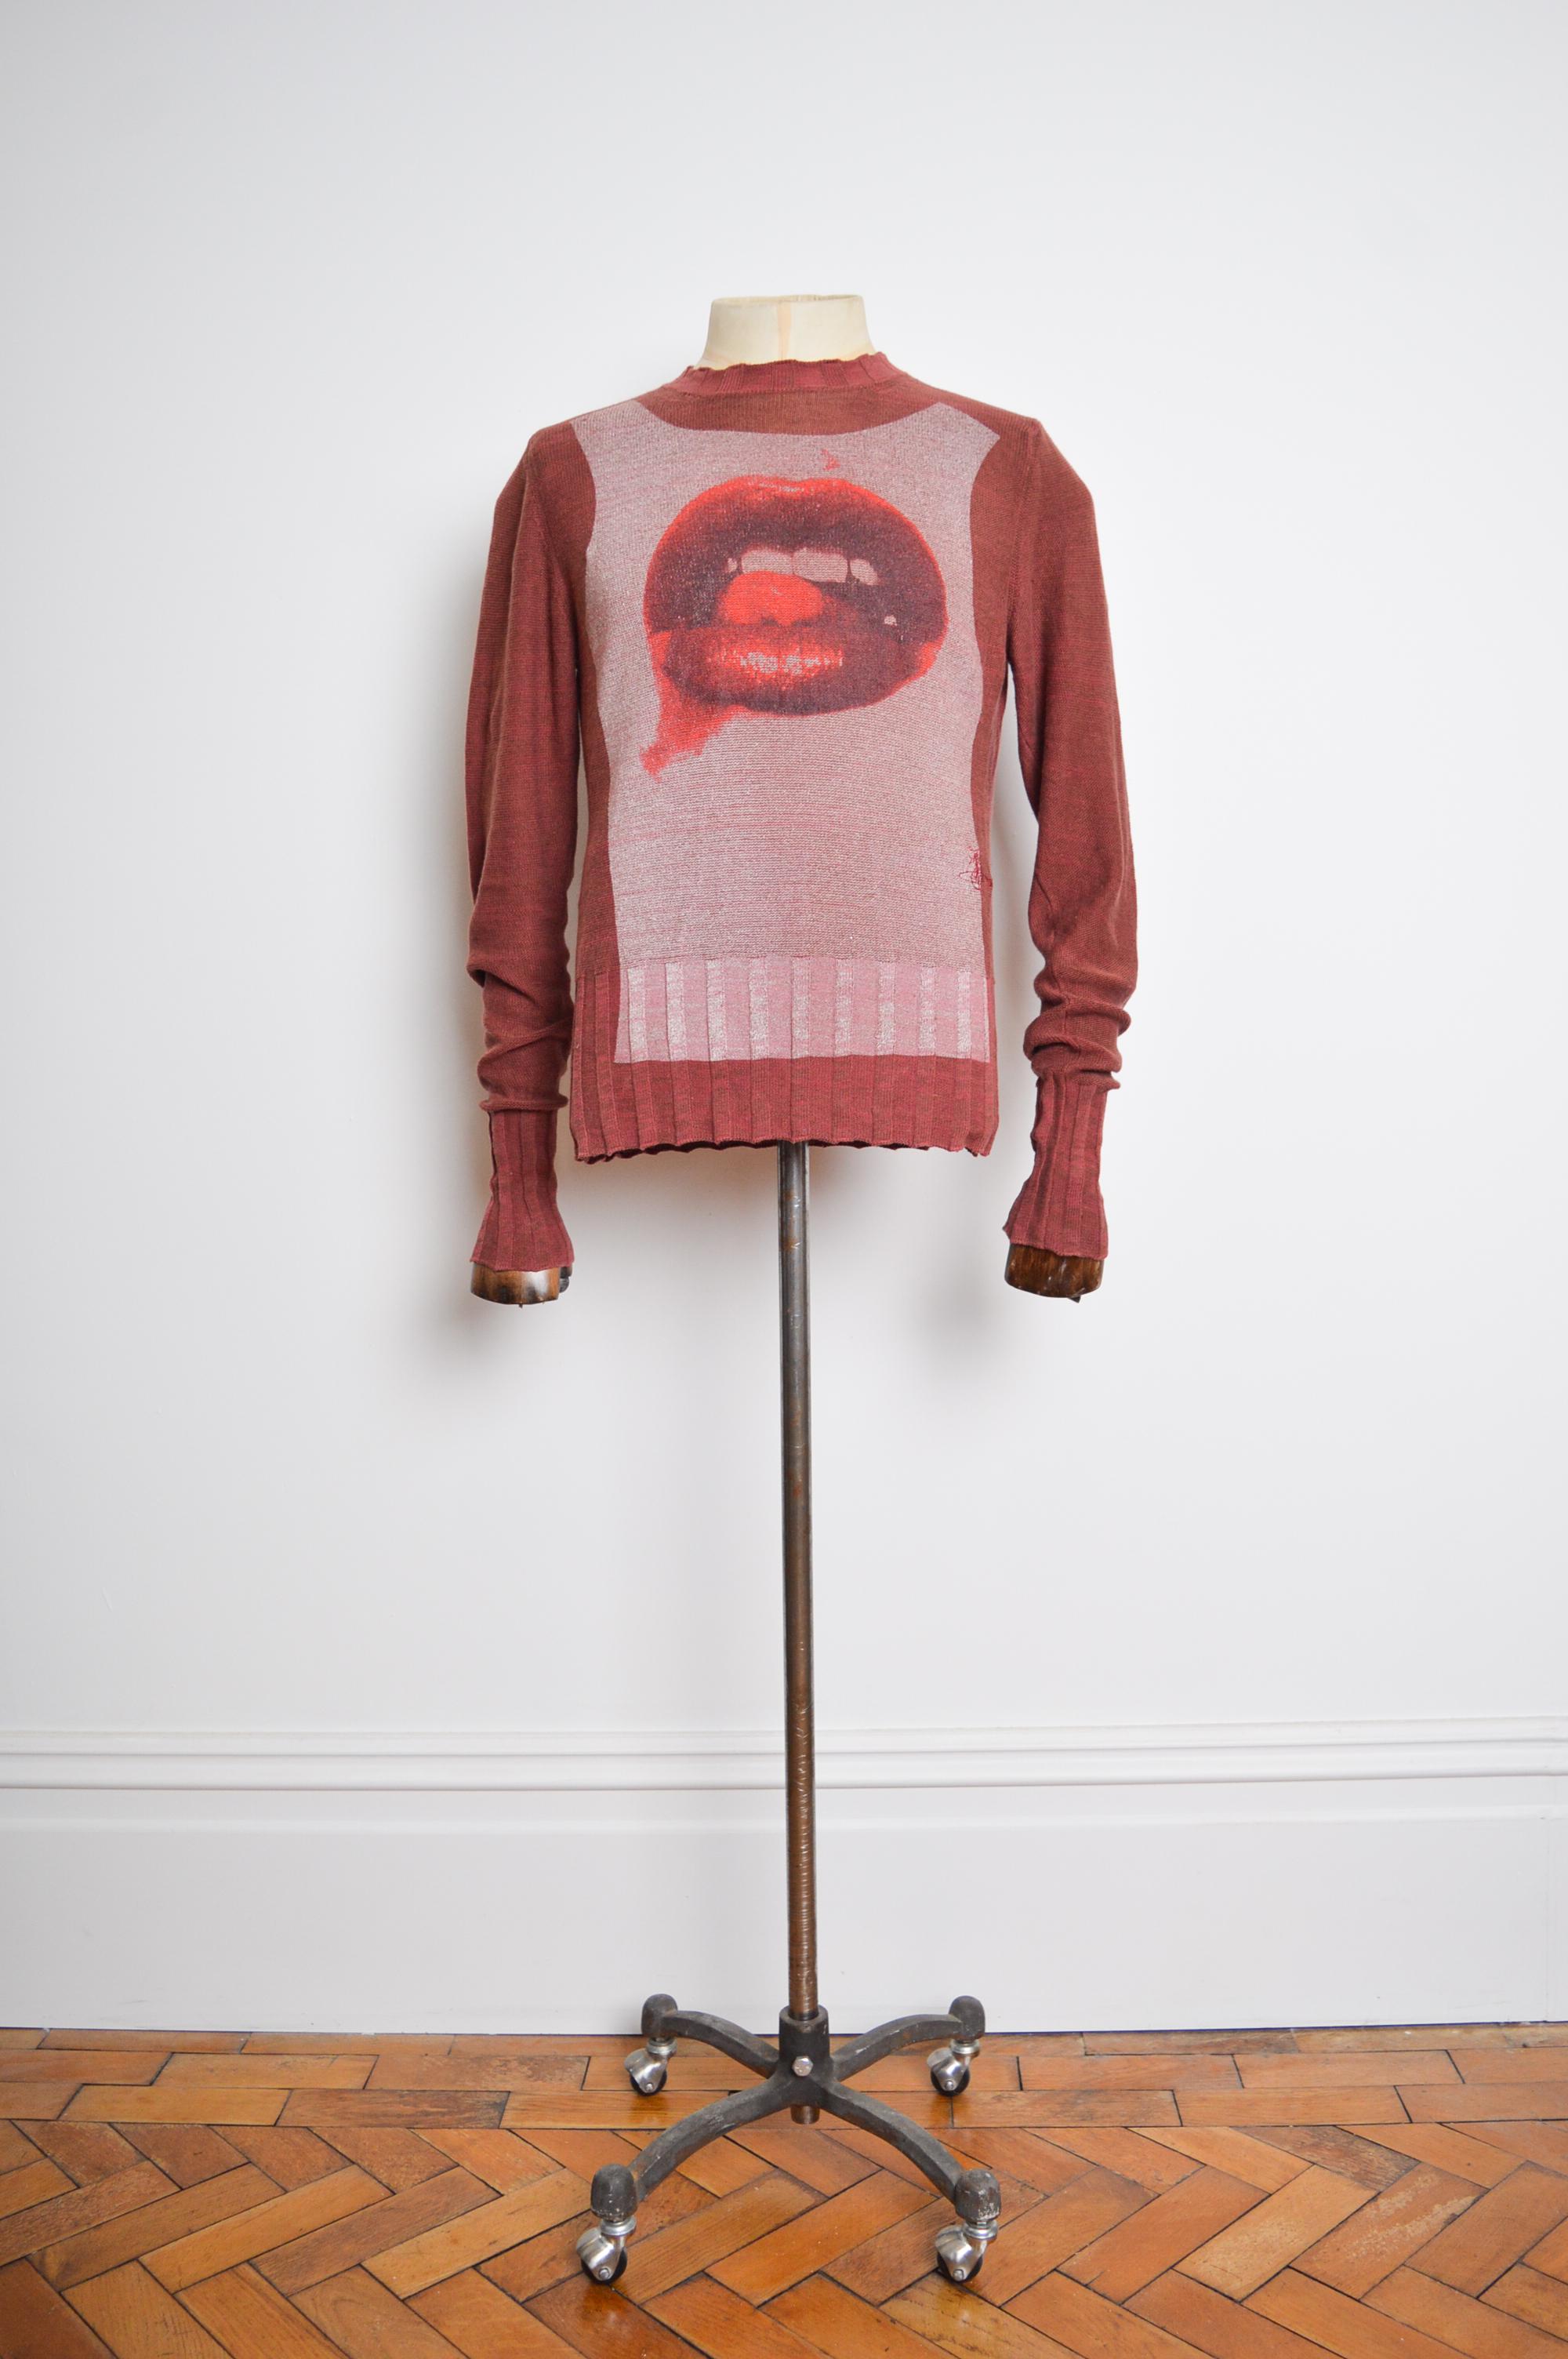 Incredible, Vivienne Westwood Ribbed Burgundy Screen Printed Lips Sweater, crafted from a blend of Cotton and linen in a Rich maroon shade with subtle embroidered Orb detailing. 

MADE IN ITALY.  

Features: Rounded neckline, Long sleeves, Iconic